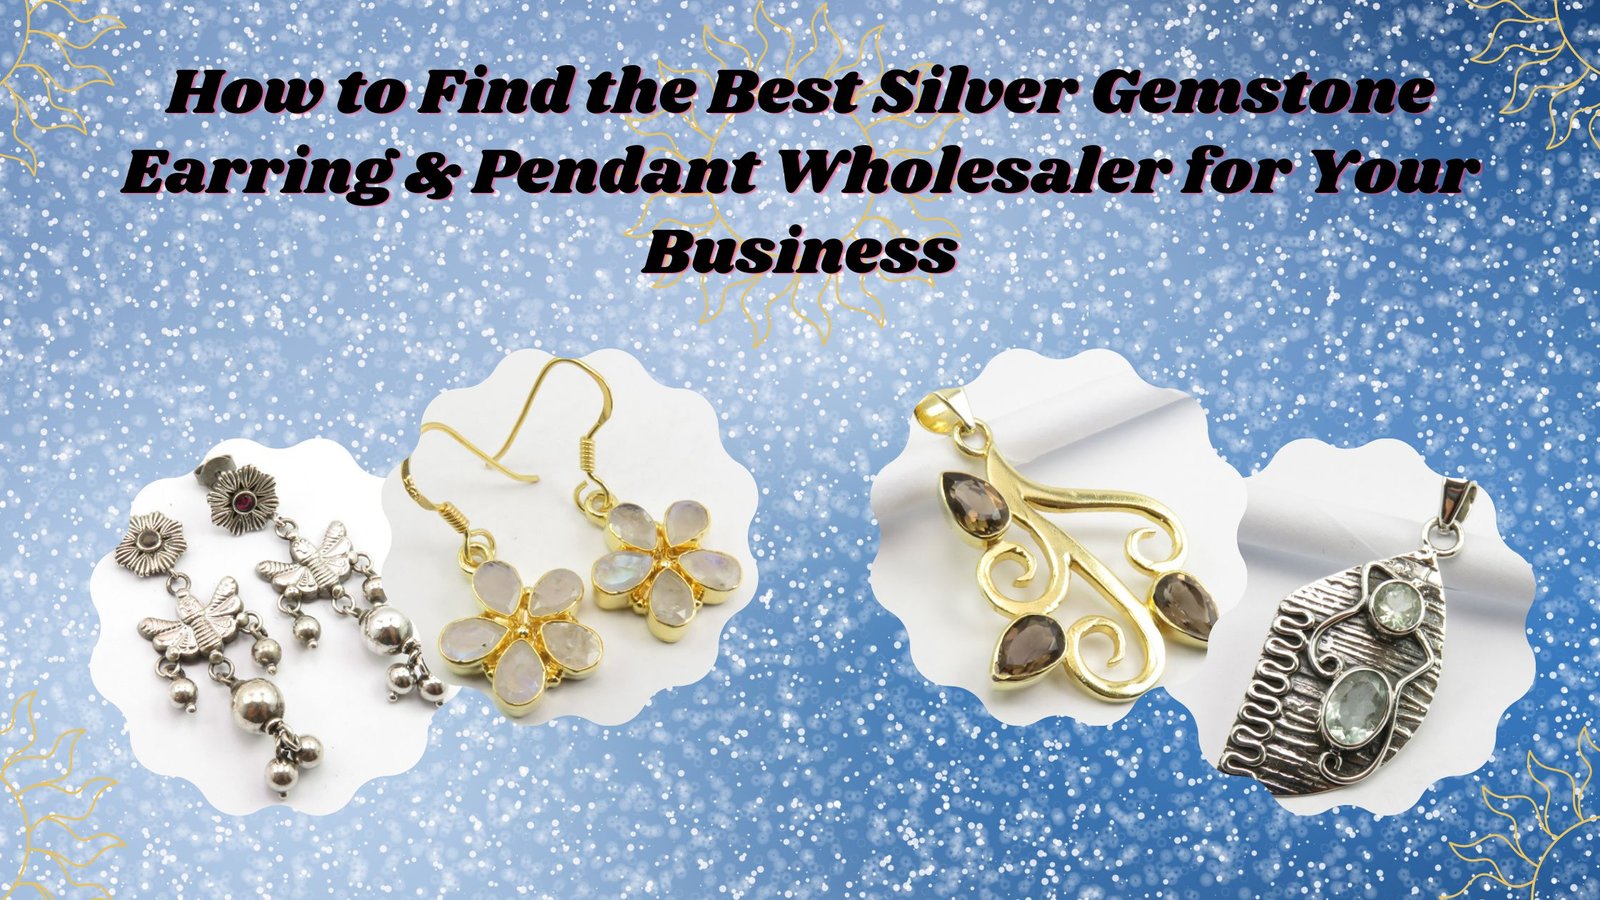 How to Find the Best Silver Gemstone Earring & Pendant Wholesaler for Your Business